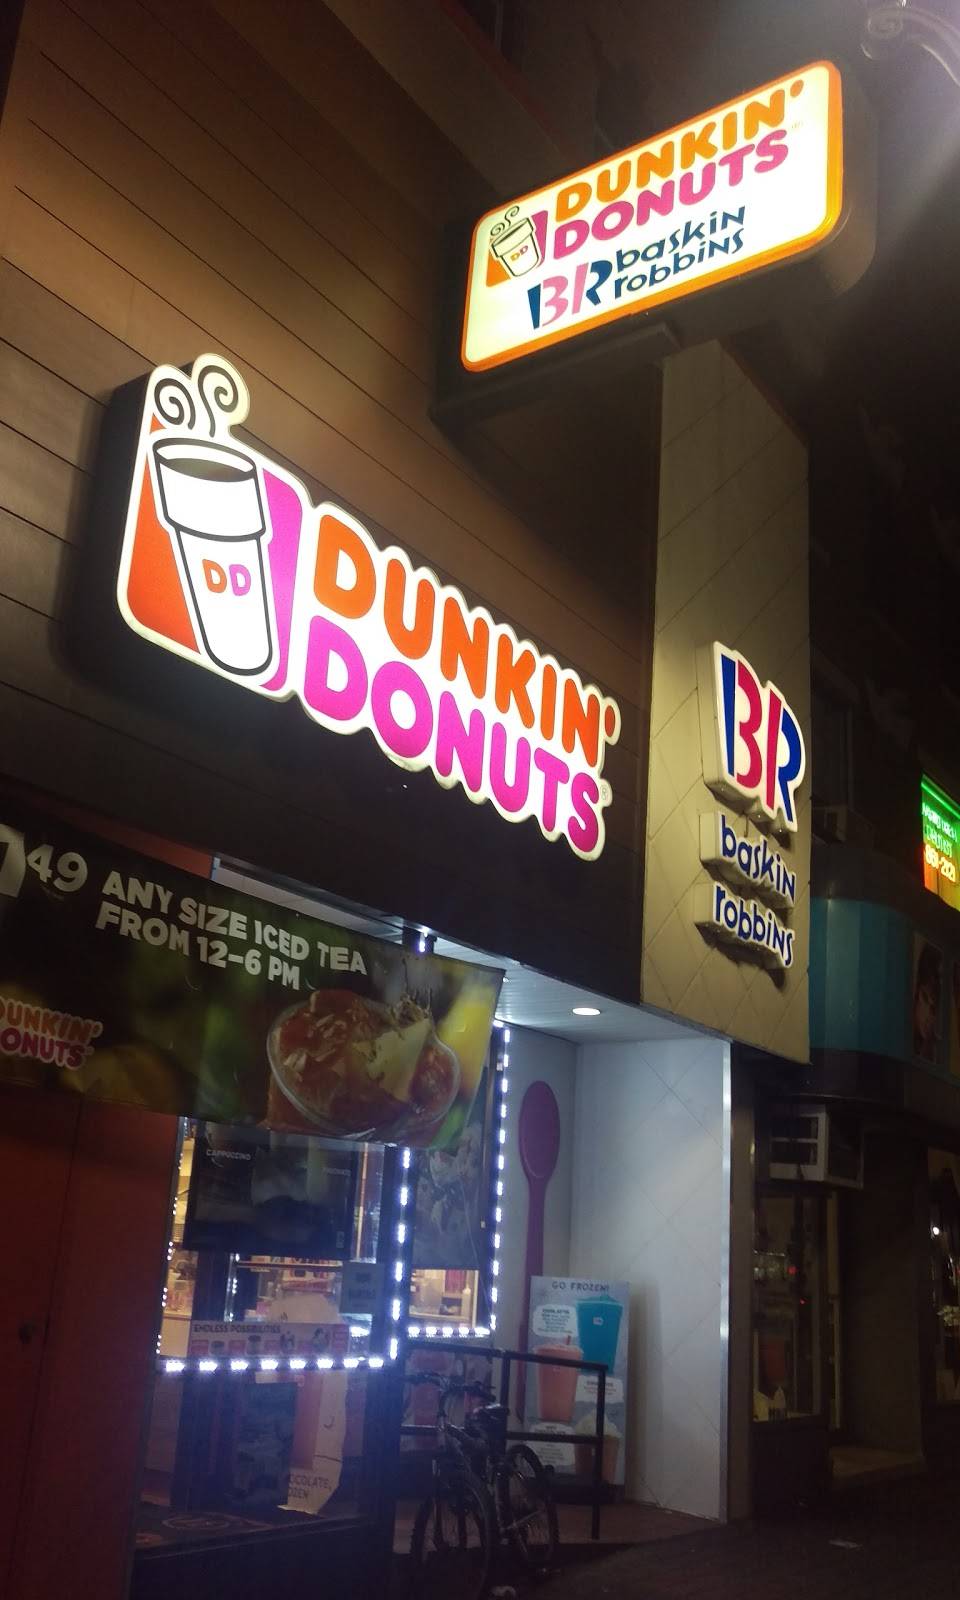 Dunkin Donuts | cafe | 5915 Bergenline Ave, West New York, NJ 07093, USA | 2018540010 OR +1 201-854-0010